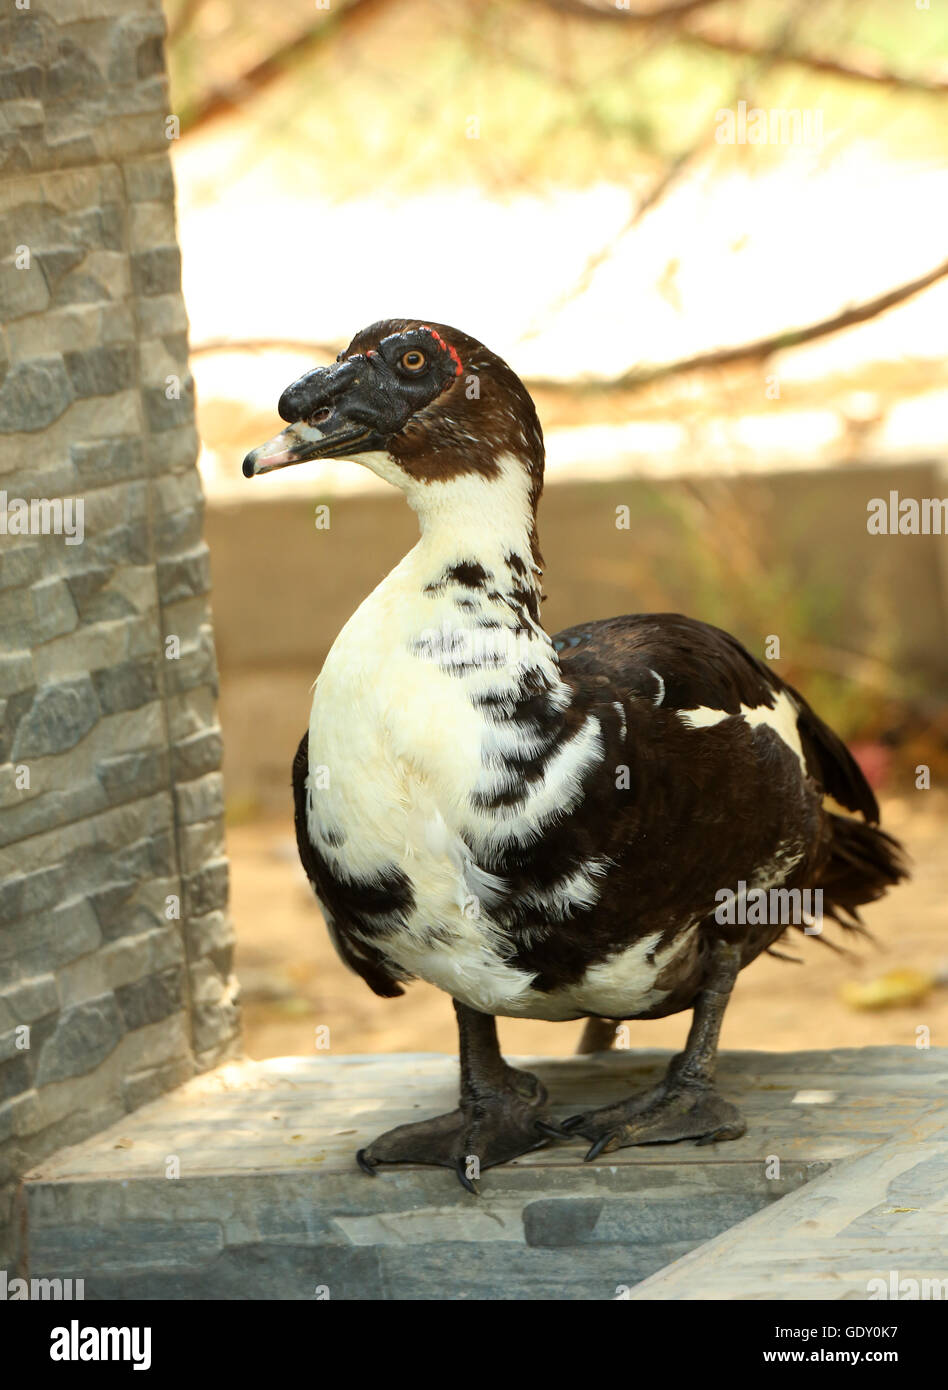 Muscovy ducks are increasingly popular pets for families. Stock Photo